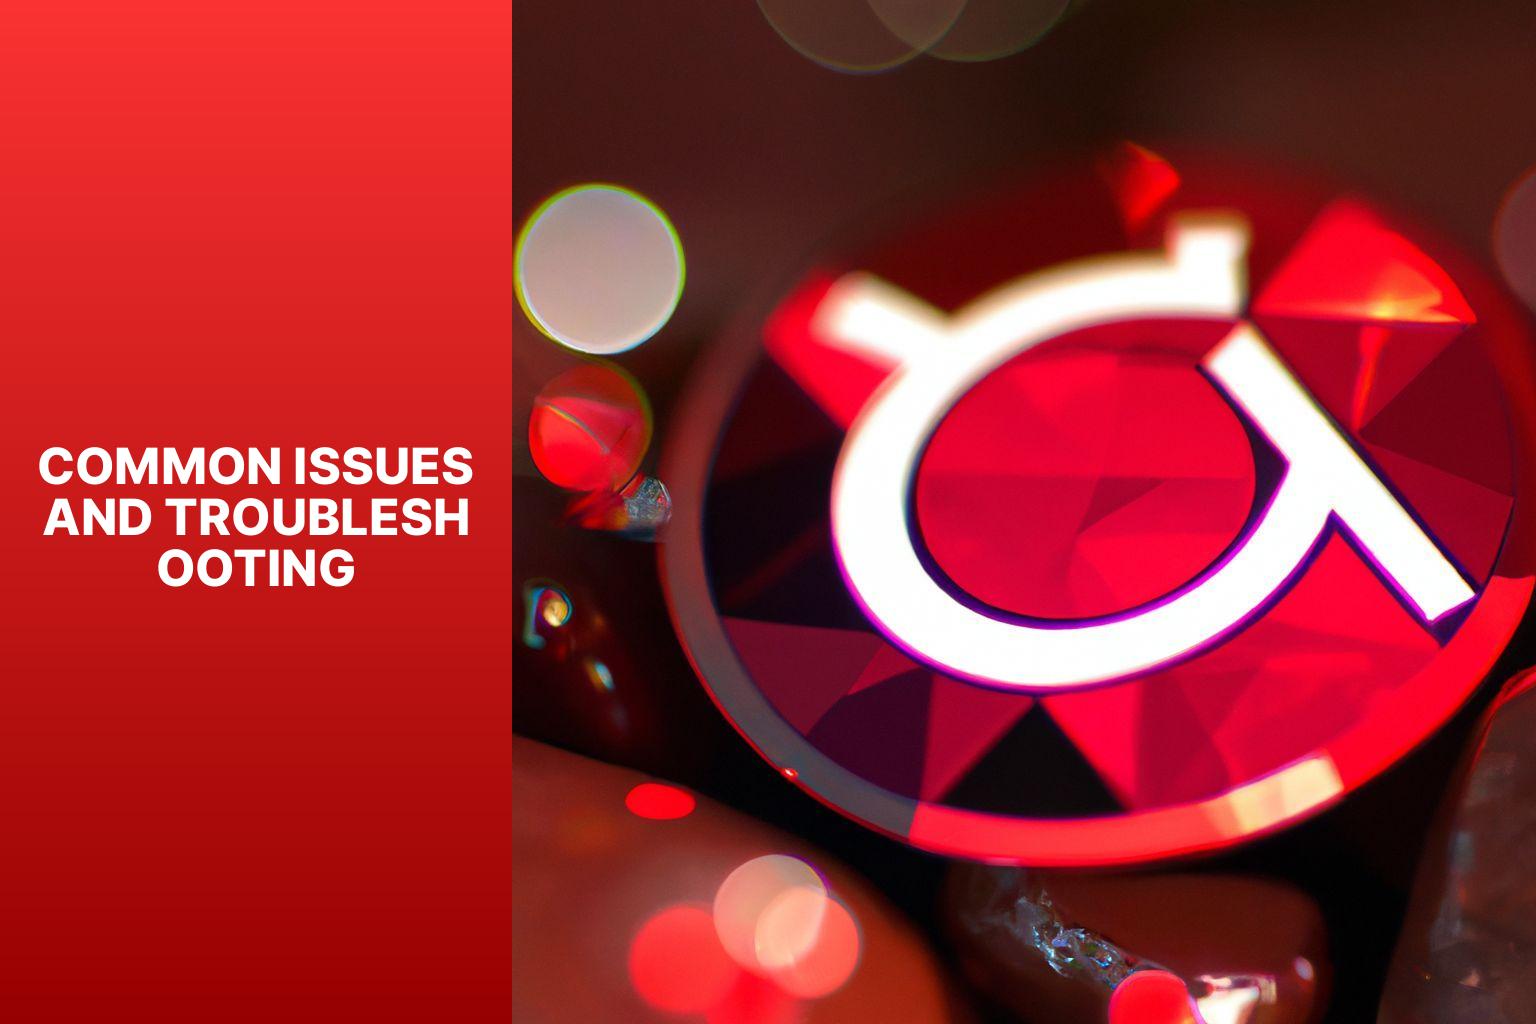 Common Issues and Troubleshooting - how to install rubygems on ubuntu 